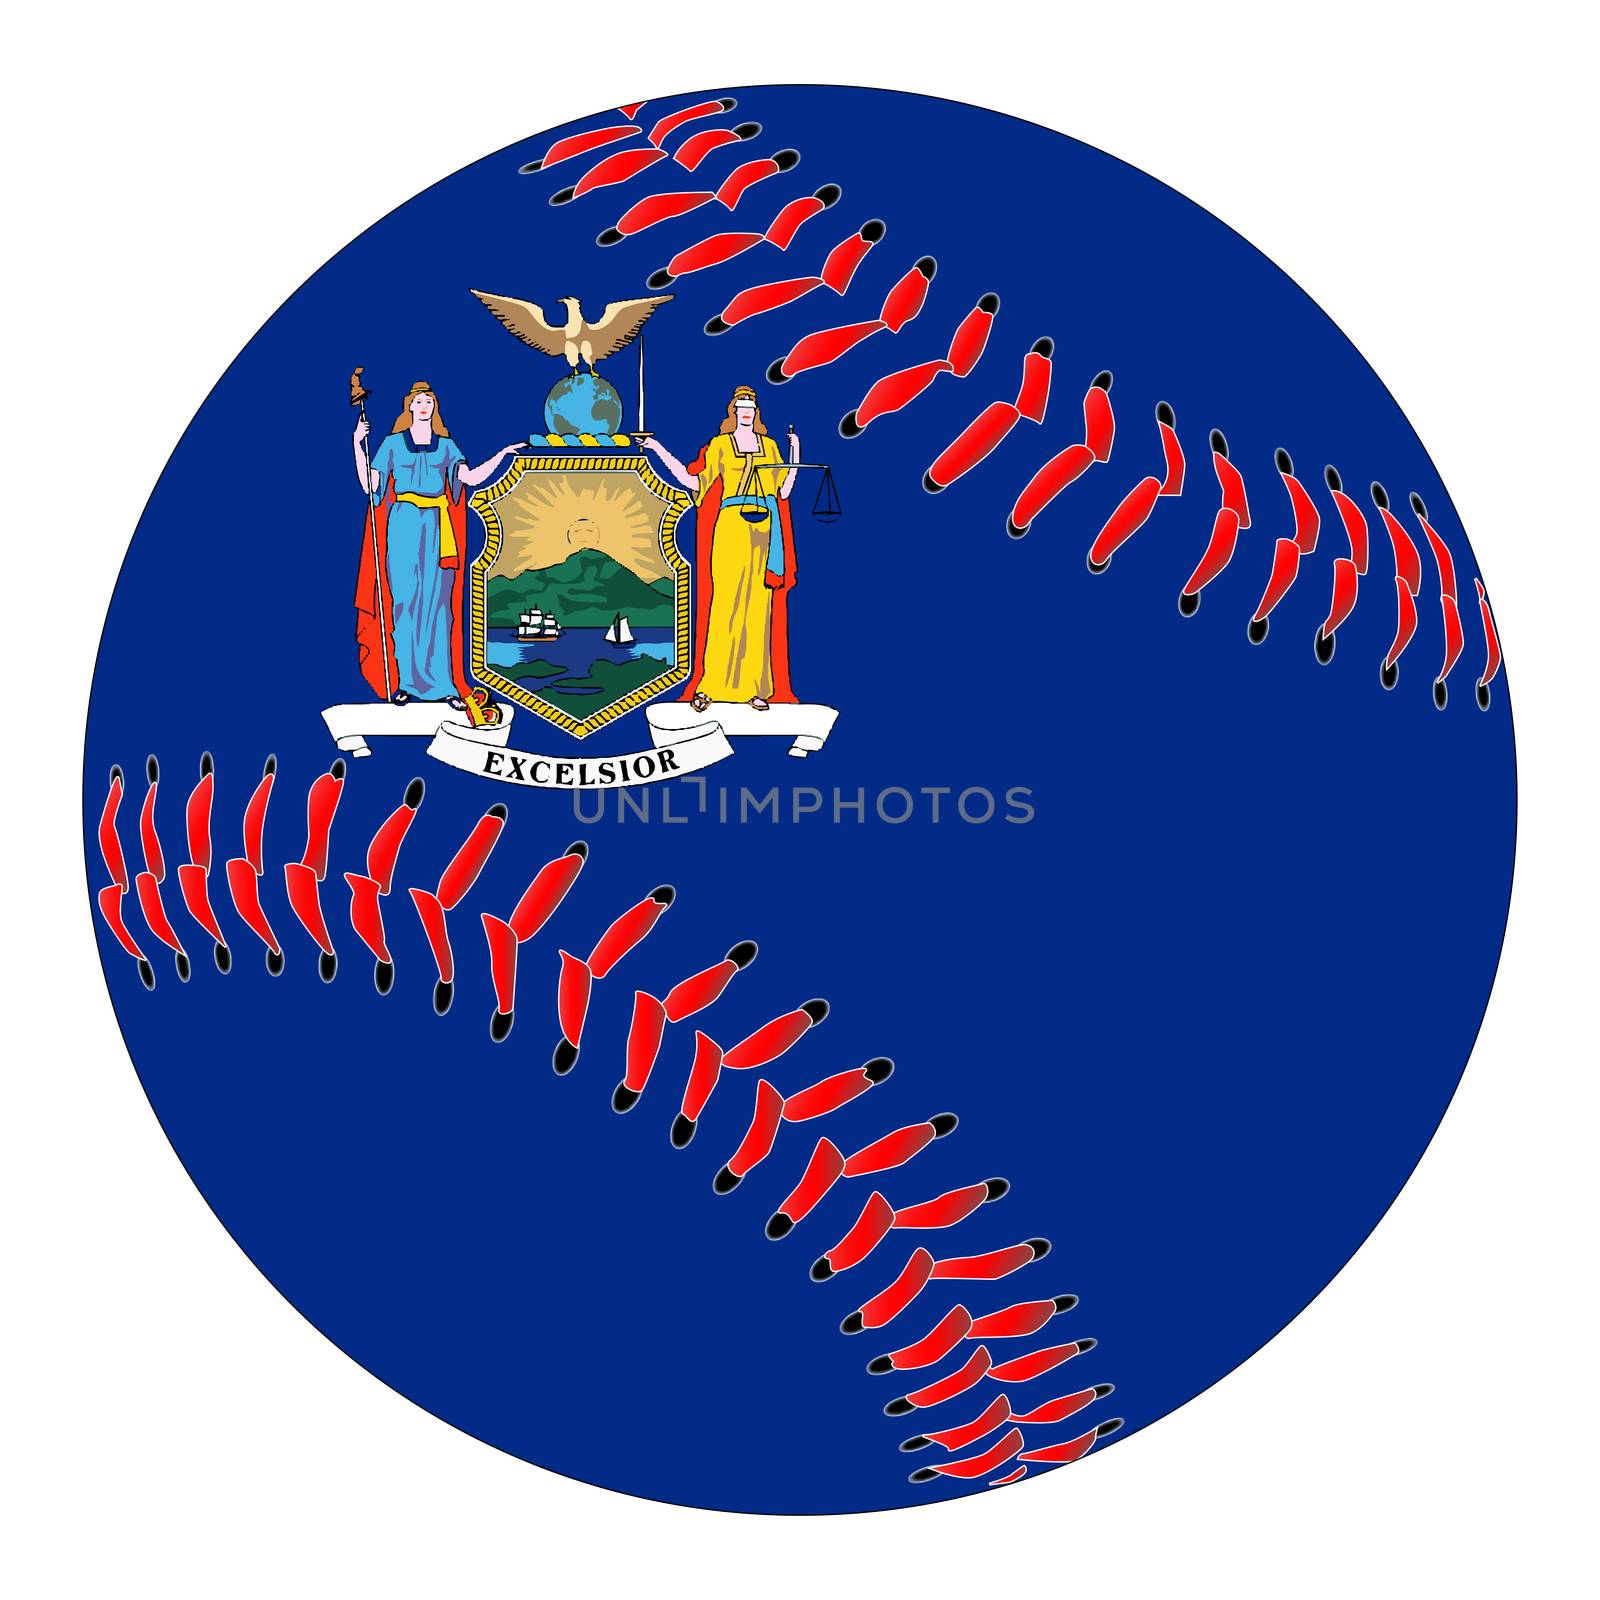 A new white baseball with red stitching with the New York state flag overlay isolated on white